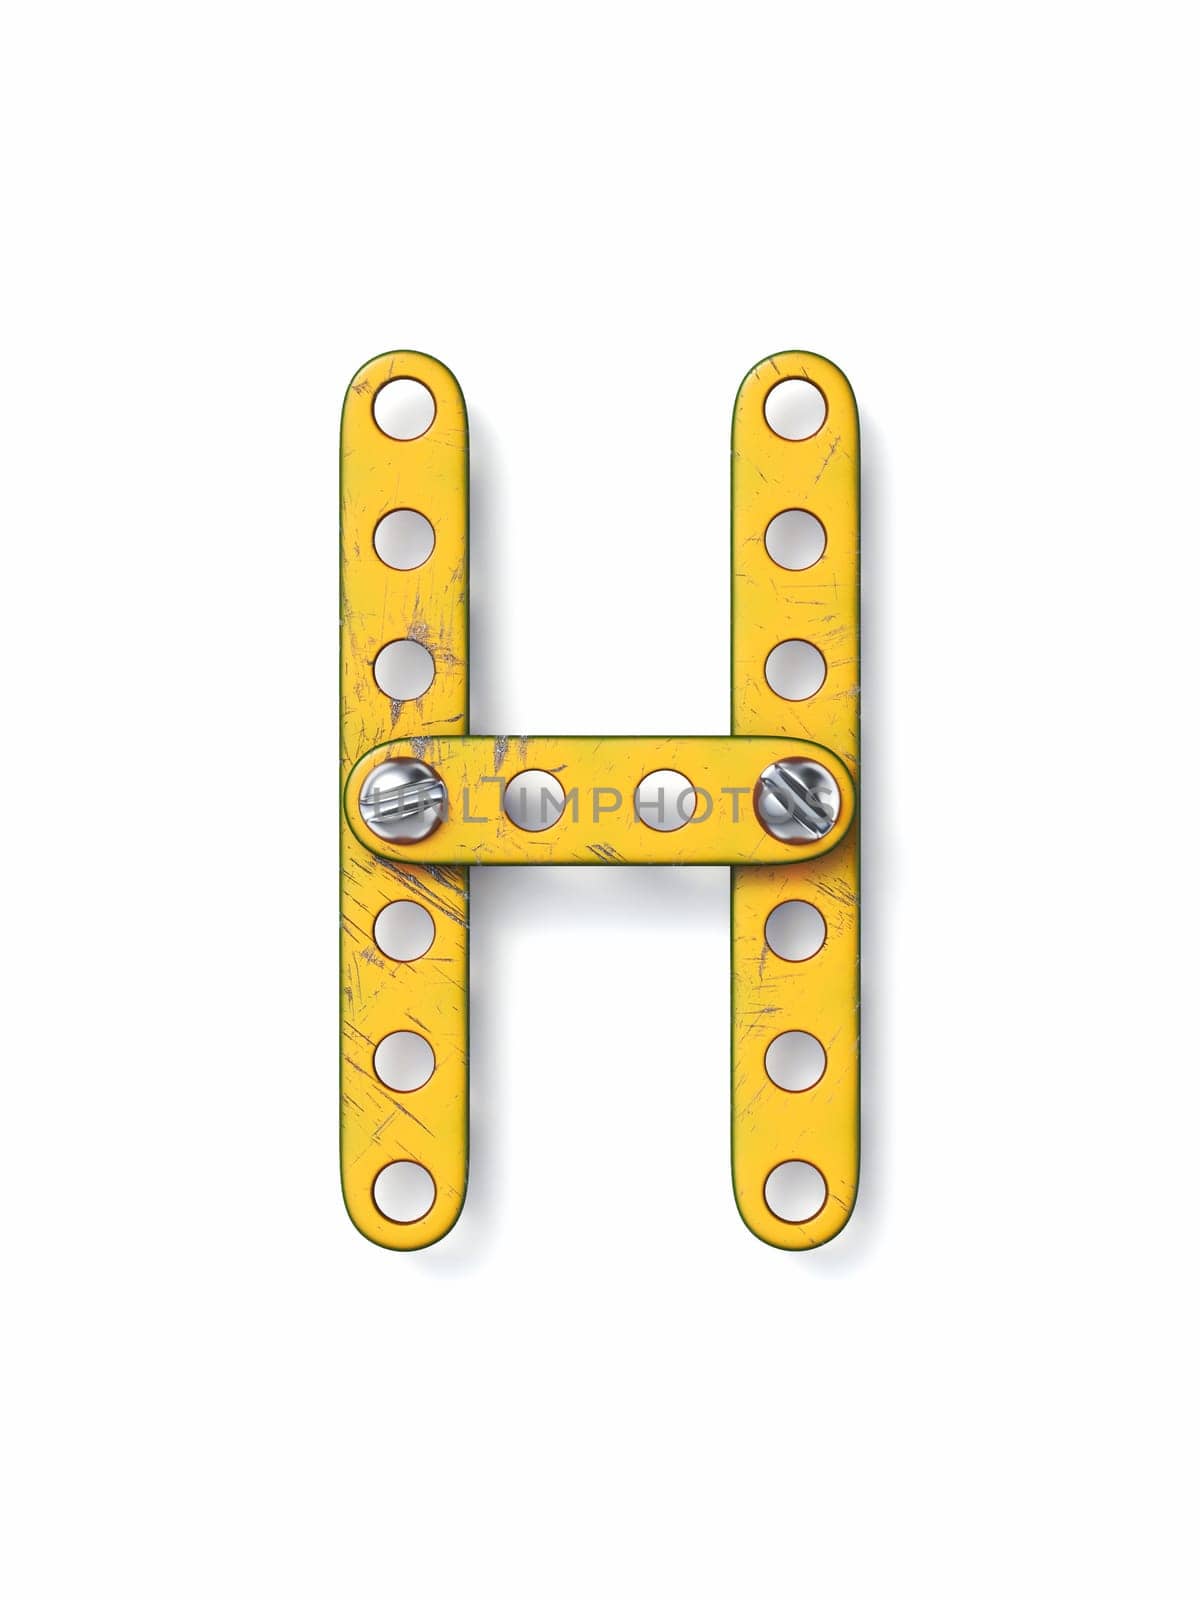 Aged yellow constructor font Letter H 3D rendering illustration isolated on white background